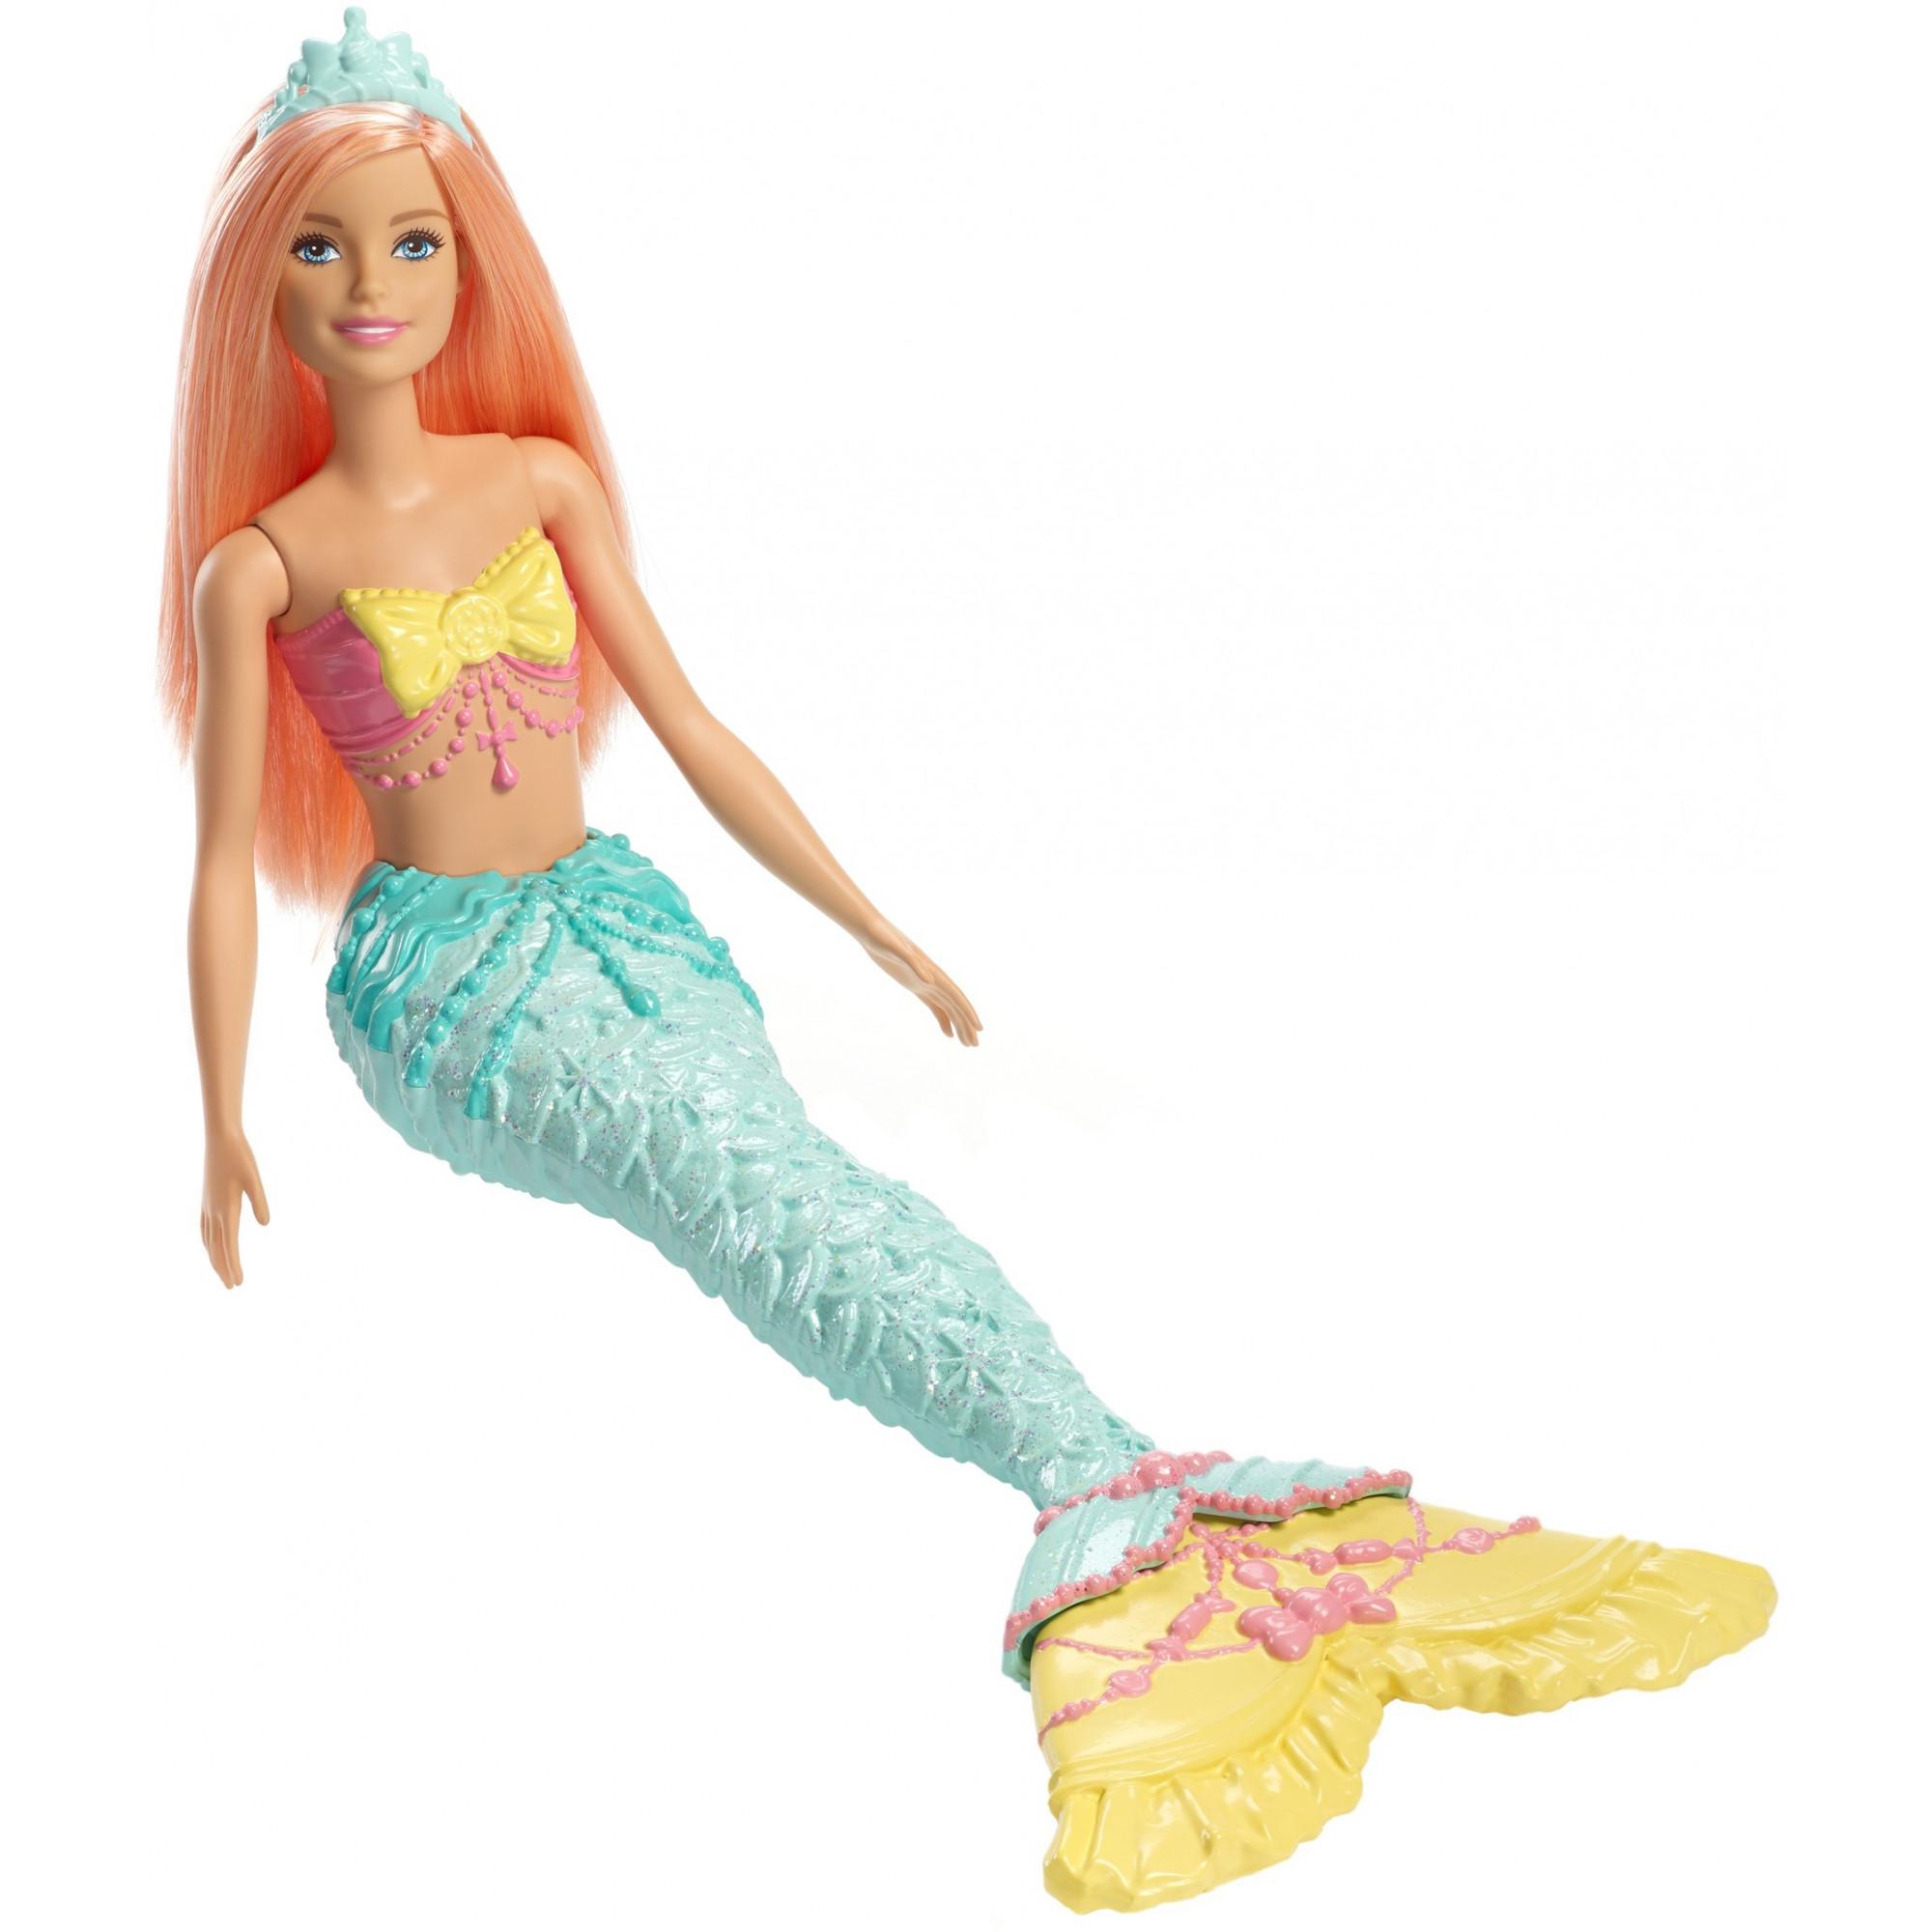 Barbie Dreamtopia Mermaid Doll with Long Coral Hair - image 3 of 8